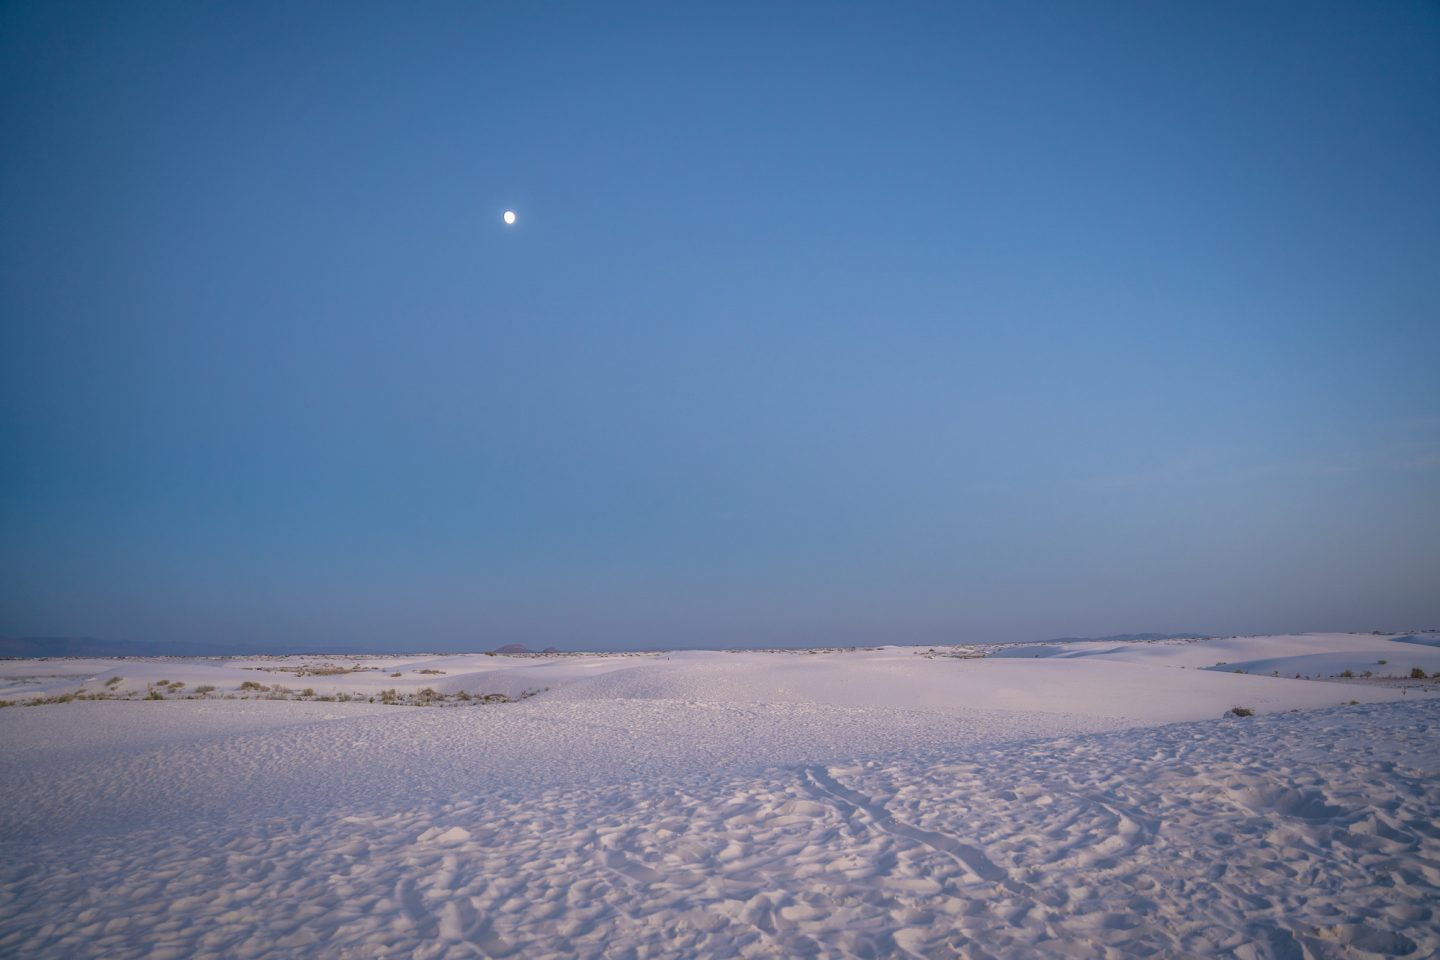 Sunset at White Sands National Park - New Mexico